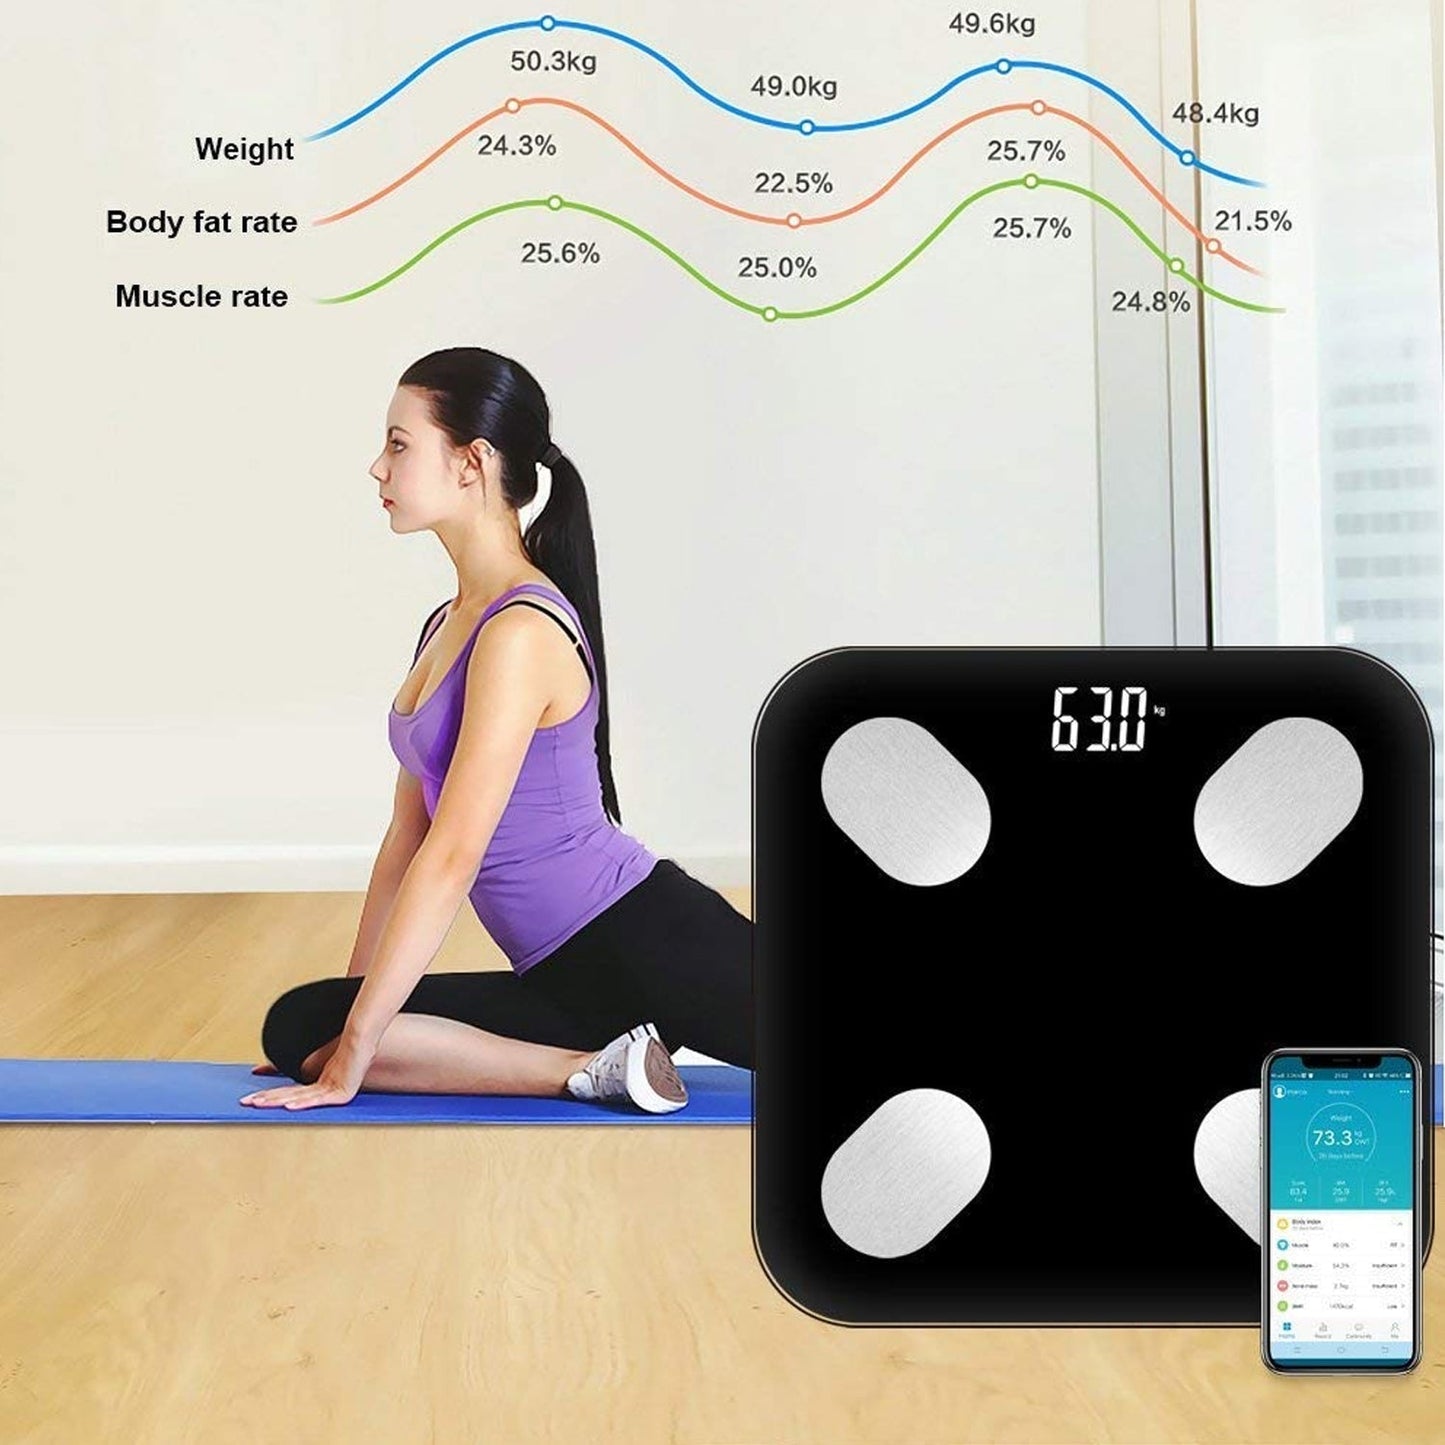 6327 Bluetooth Body Fat Scale Digital Smart Body Weight Scale iOS and Android App to Manage Body Weight, Body Fat, Water, Muscle Mass, BMI, BMR, Bone Mass and Visceral Fat with BMI Scale DeoDap